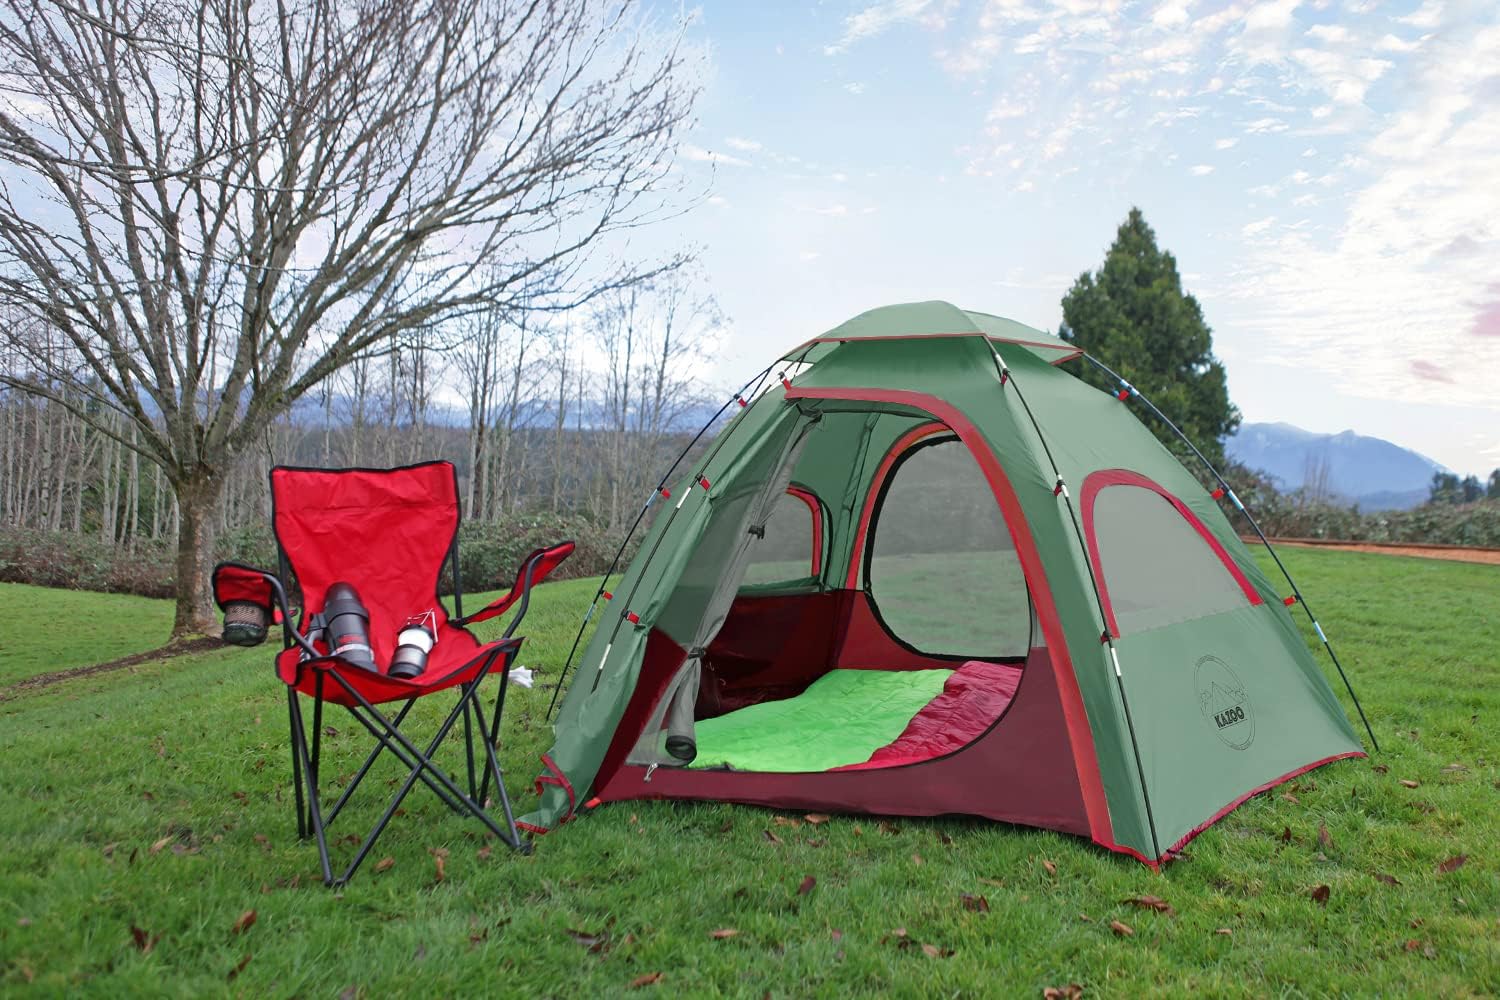 KAZOO Outdoor Tent: Spacious, Waterproof, and Easy to Set Up